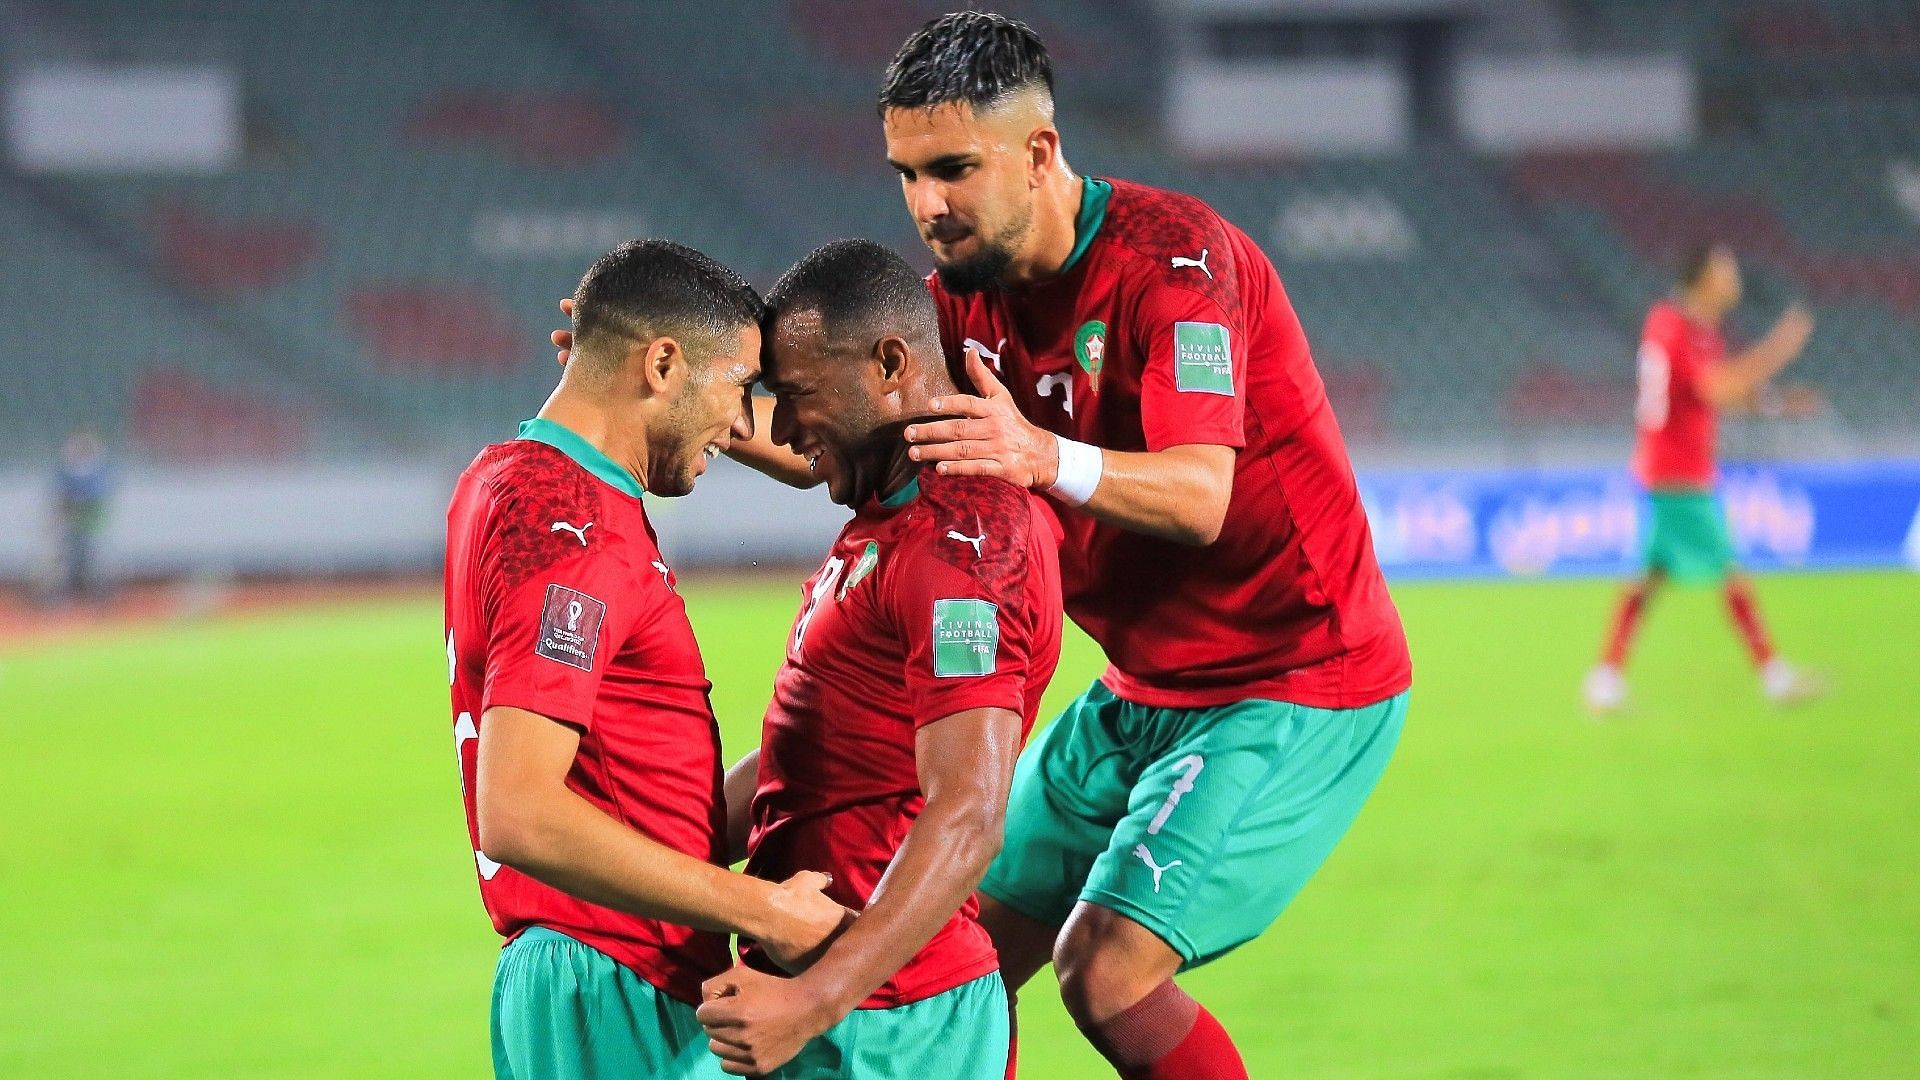 Morocco face Ghana in their opening fixture of the 2021 AFCON on Monday